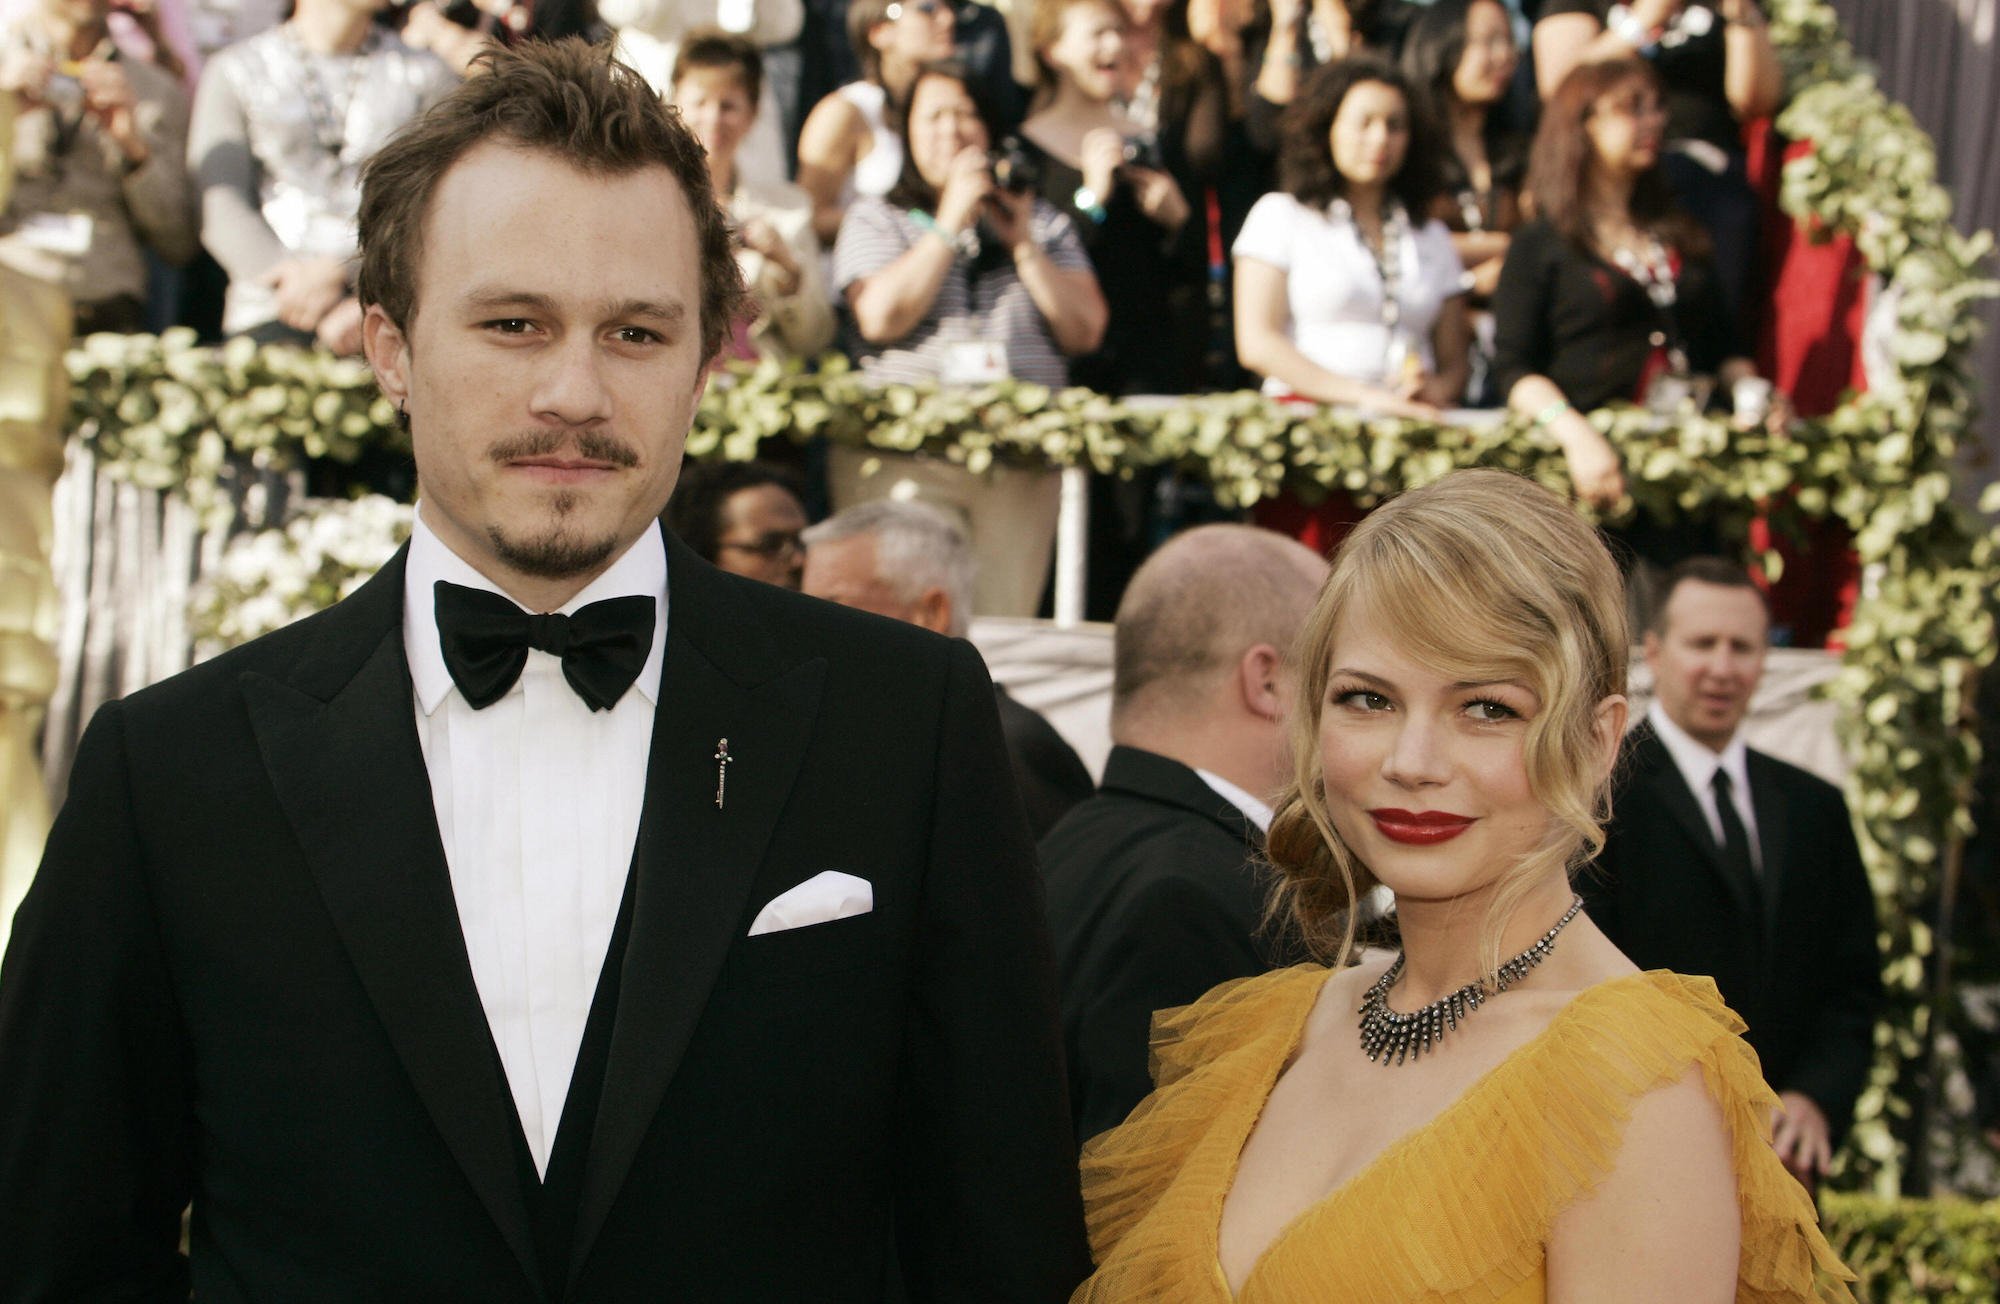 Michelle Williams finds love, marries after Heath Ledger death | Reuters